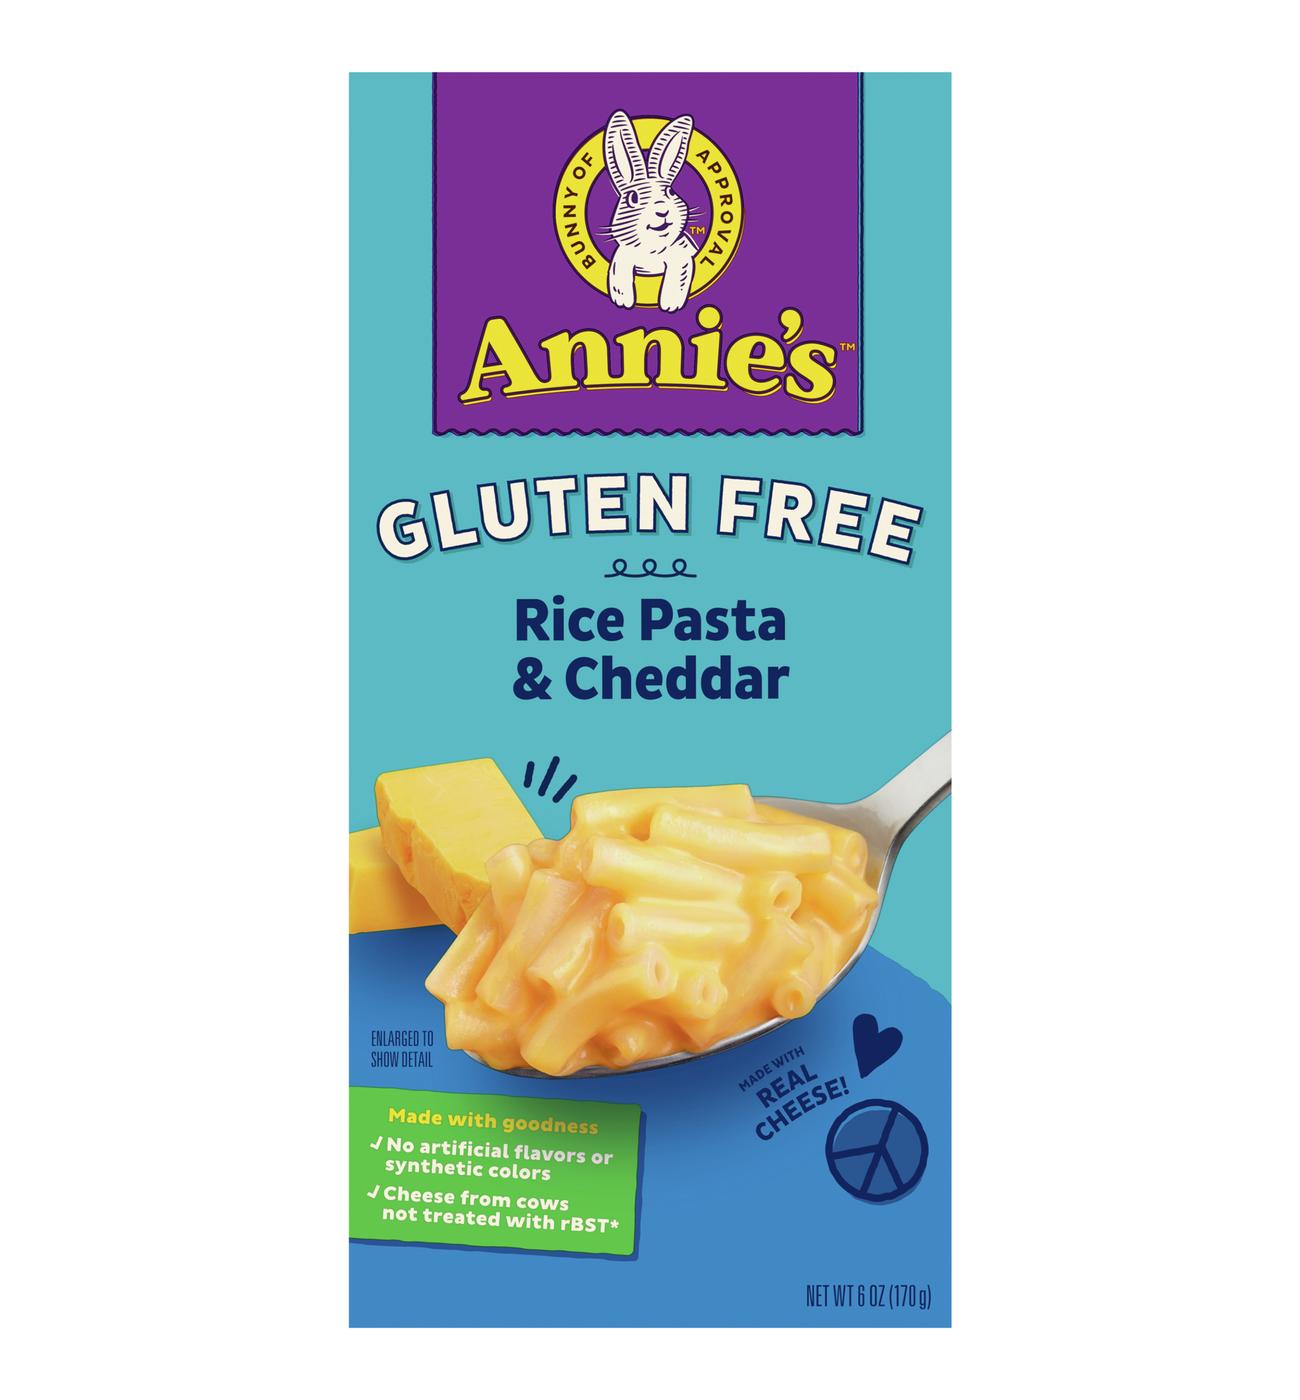 Annie's Gluten Free Rice Pasta and Cheddar; image 1 of 2